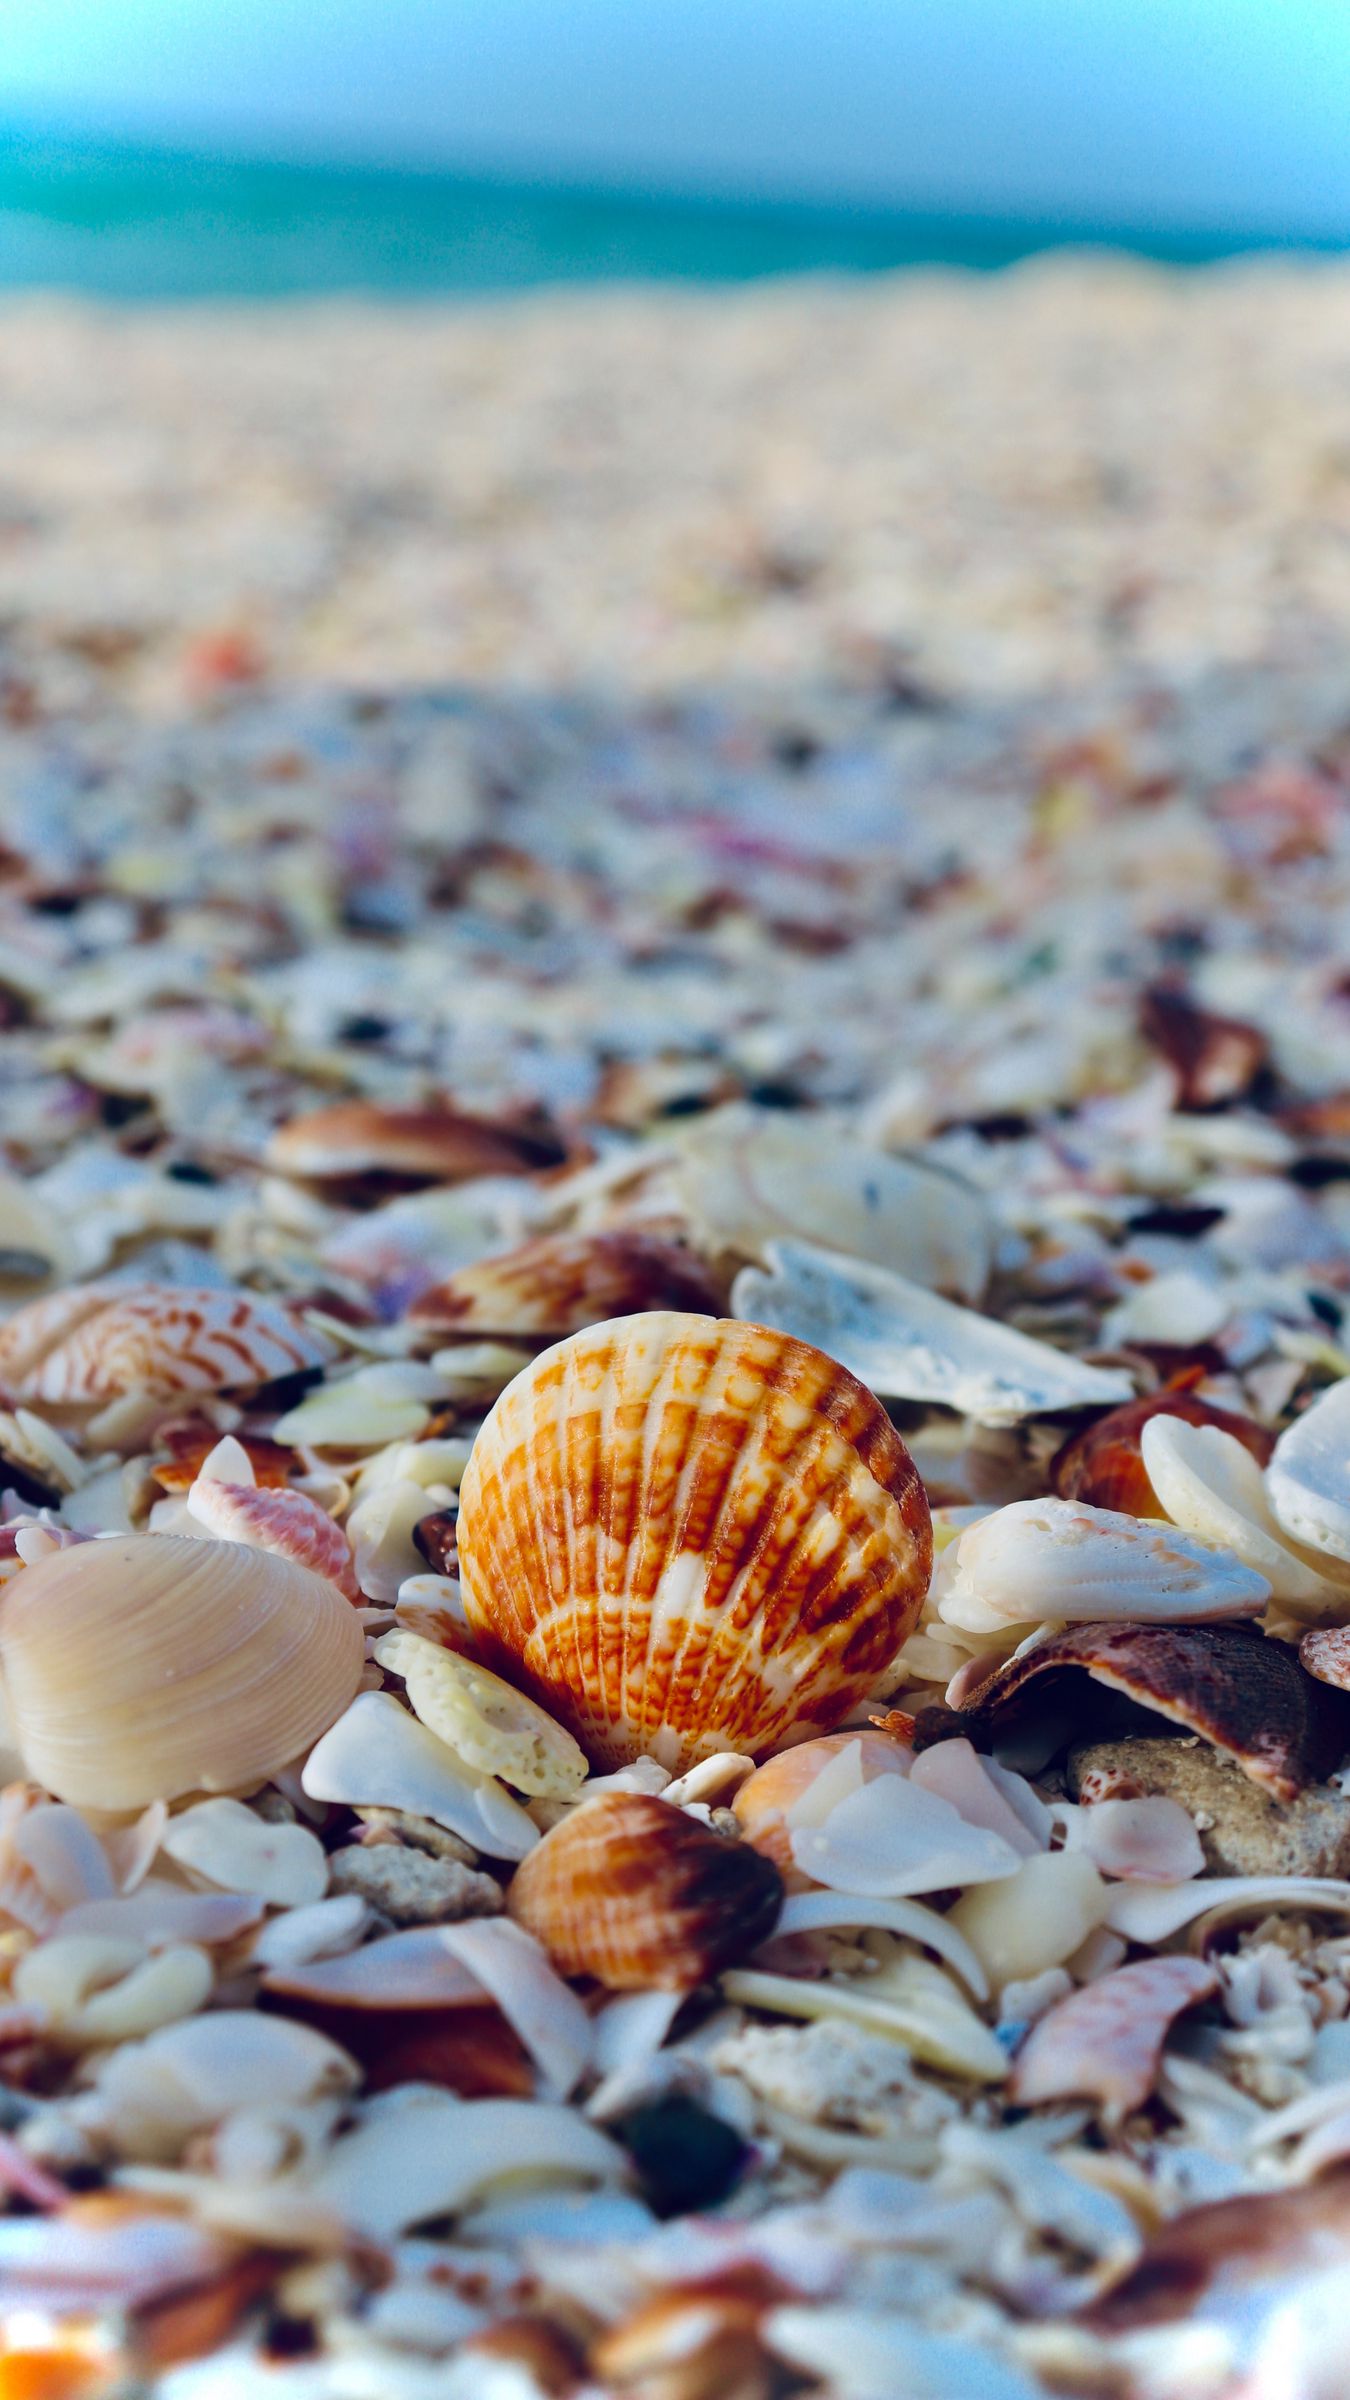 Download wallpaper 1350x2400 shells the beach sea the rest iphone  876s6 for parallax hd background